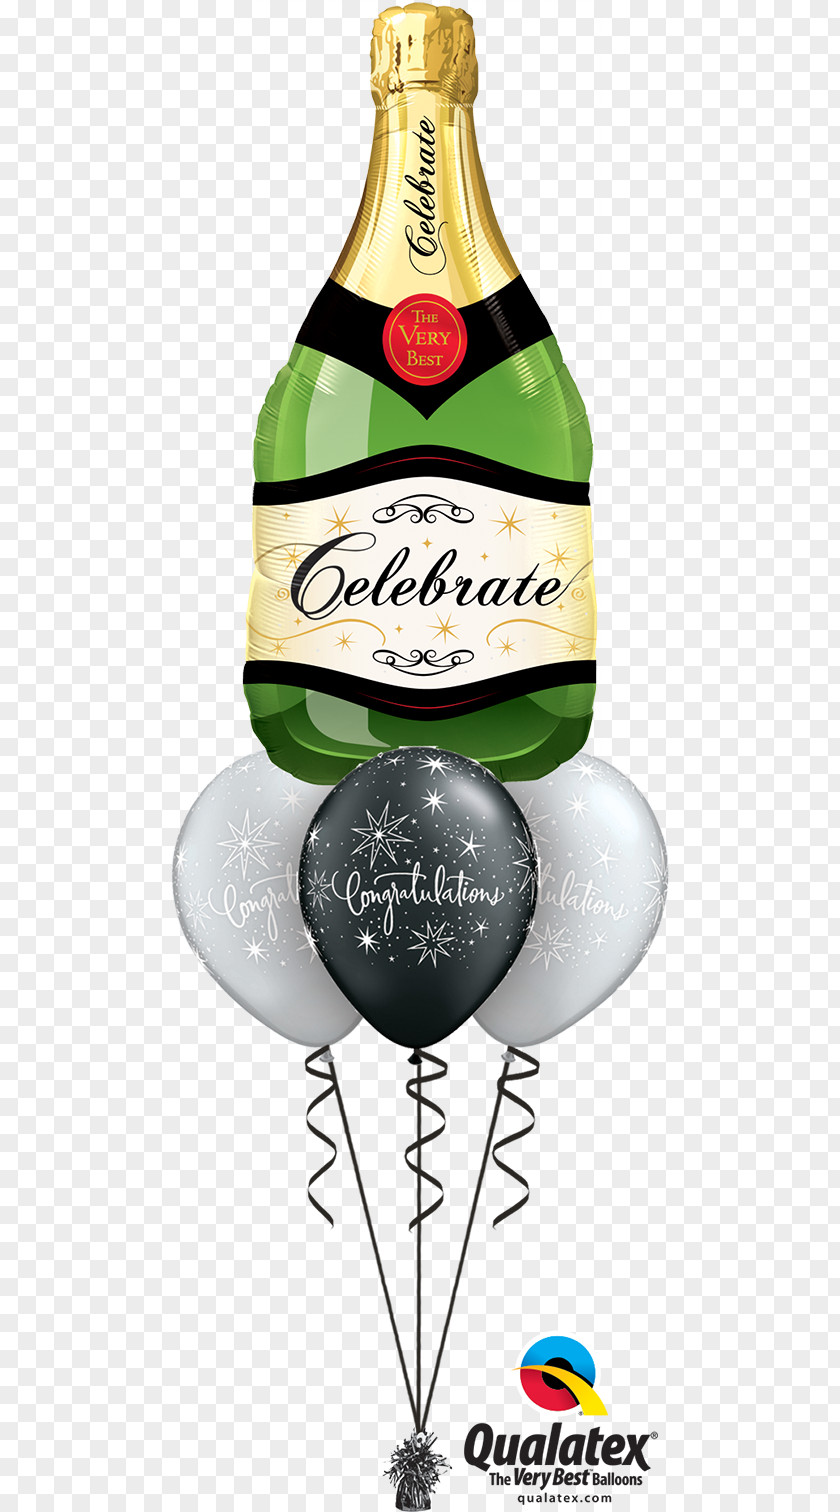 Champagne Sparkling Wine Balloon Bottle PNG